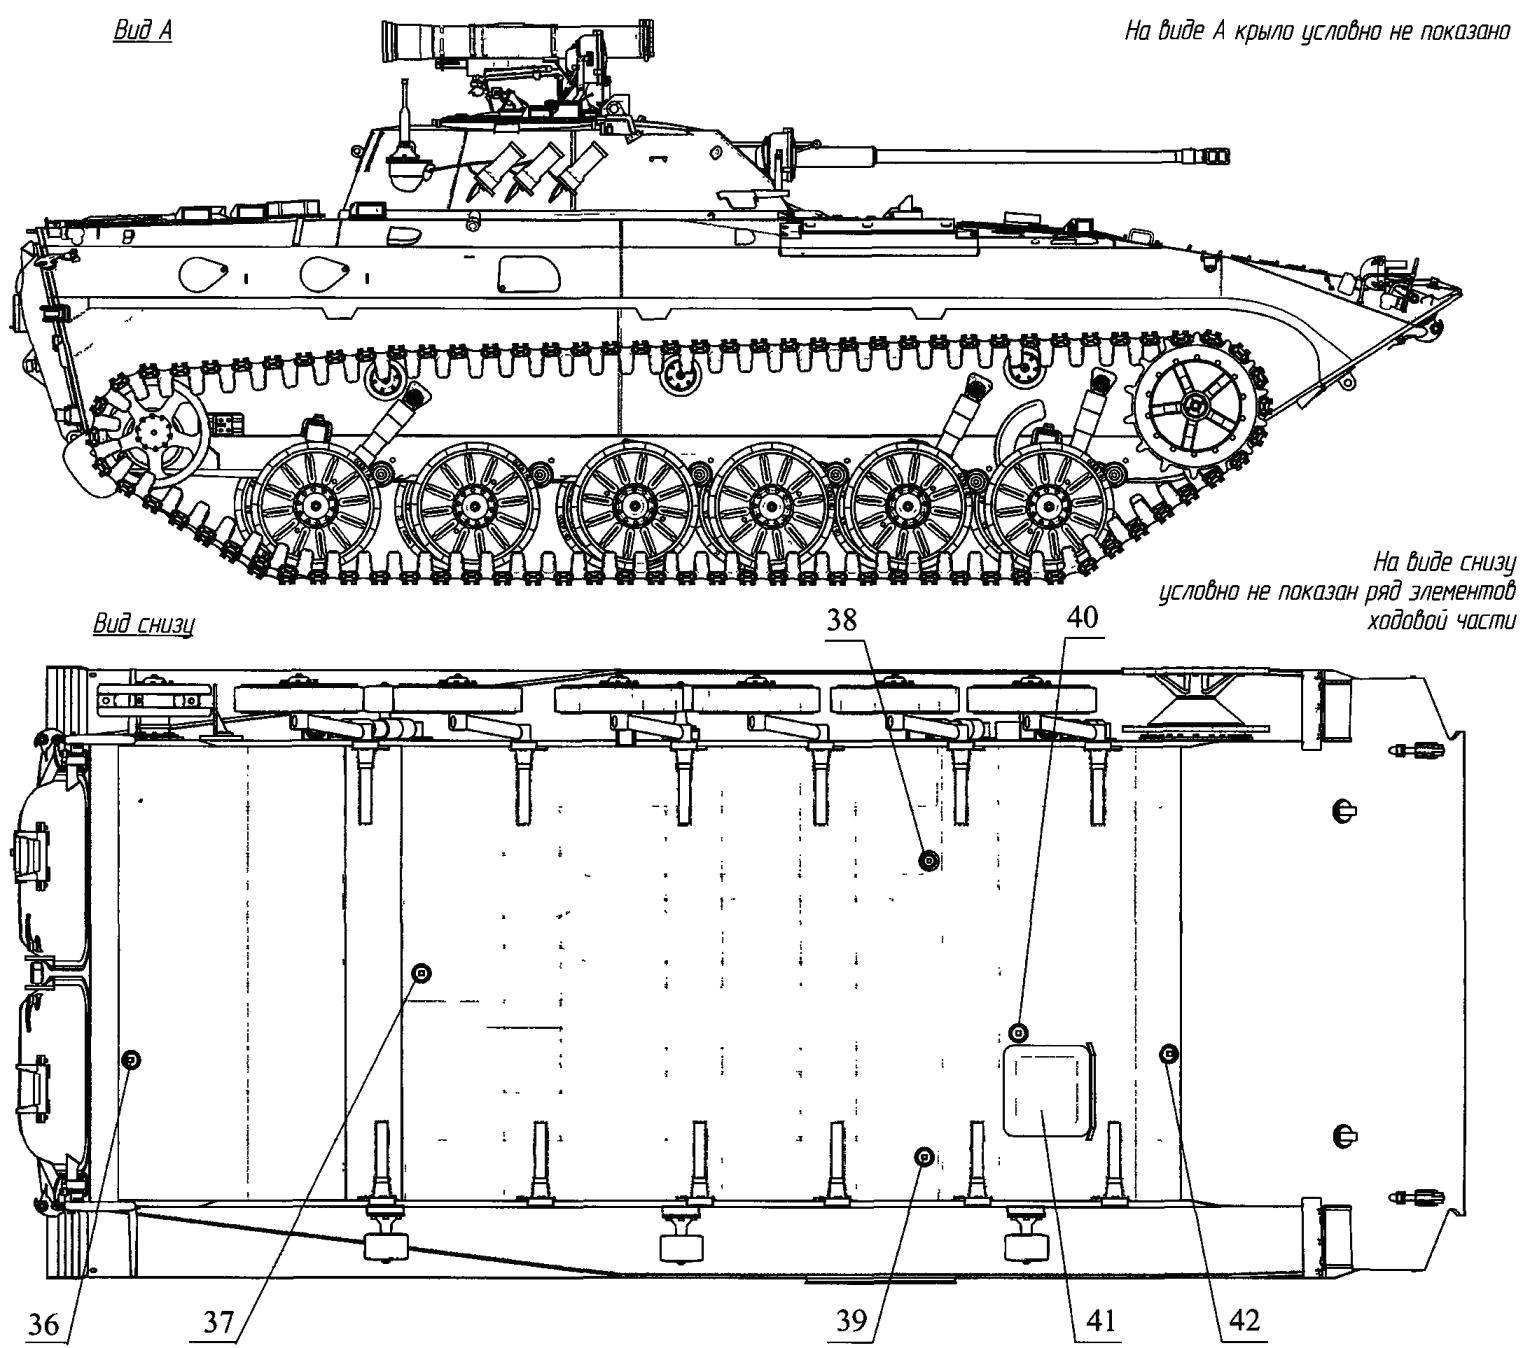 Infantry fighting vehicle BMP-2